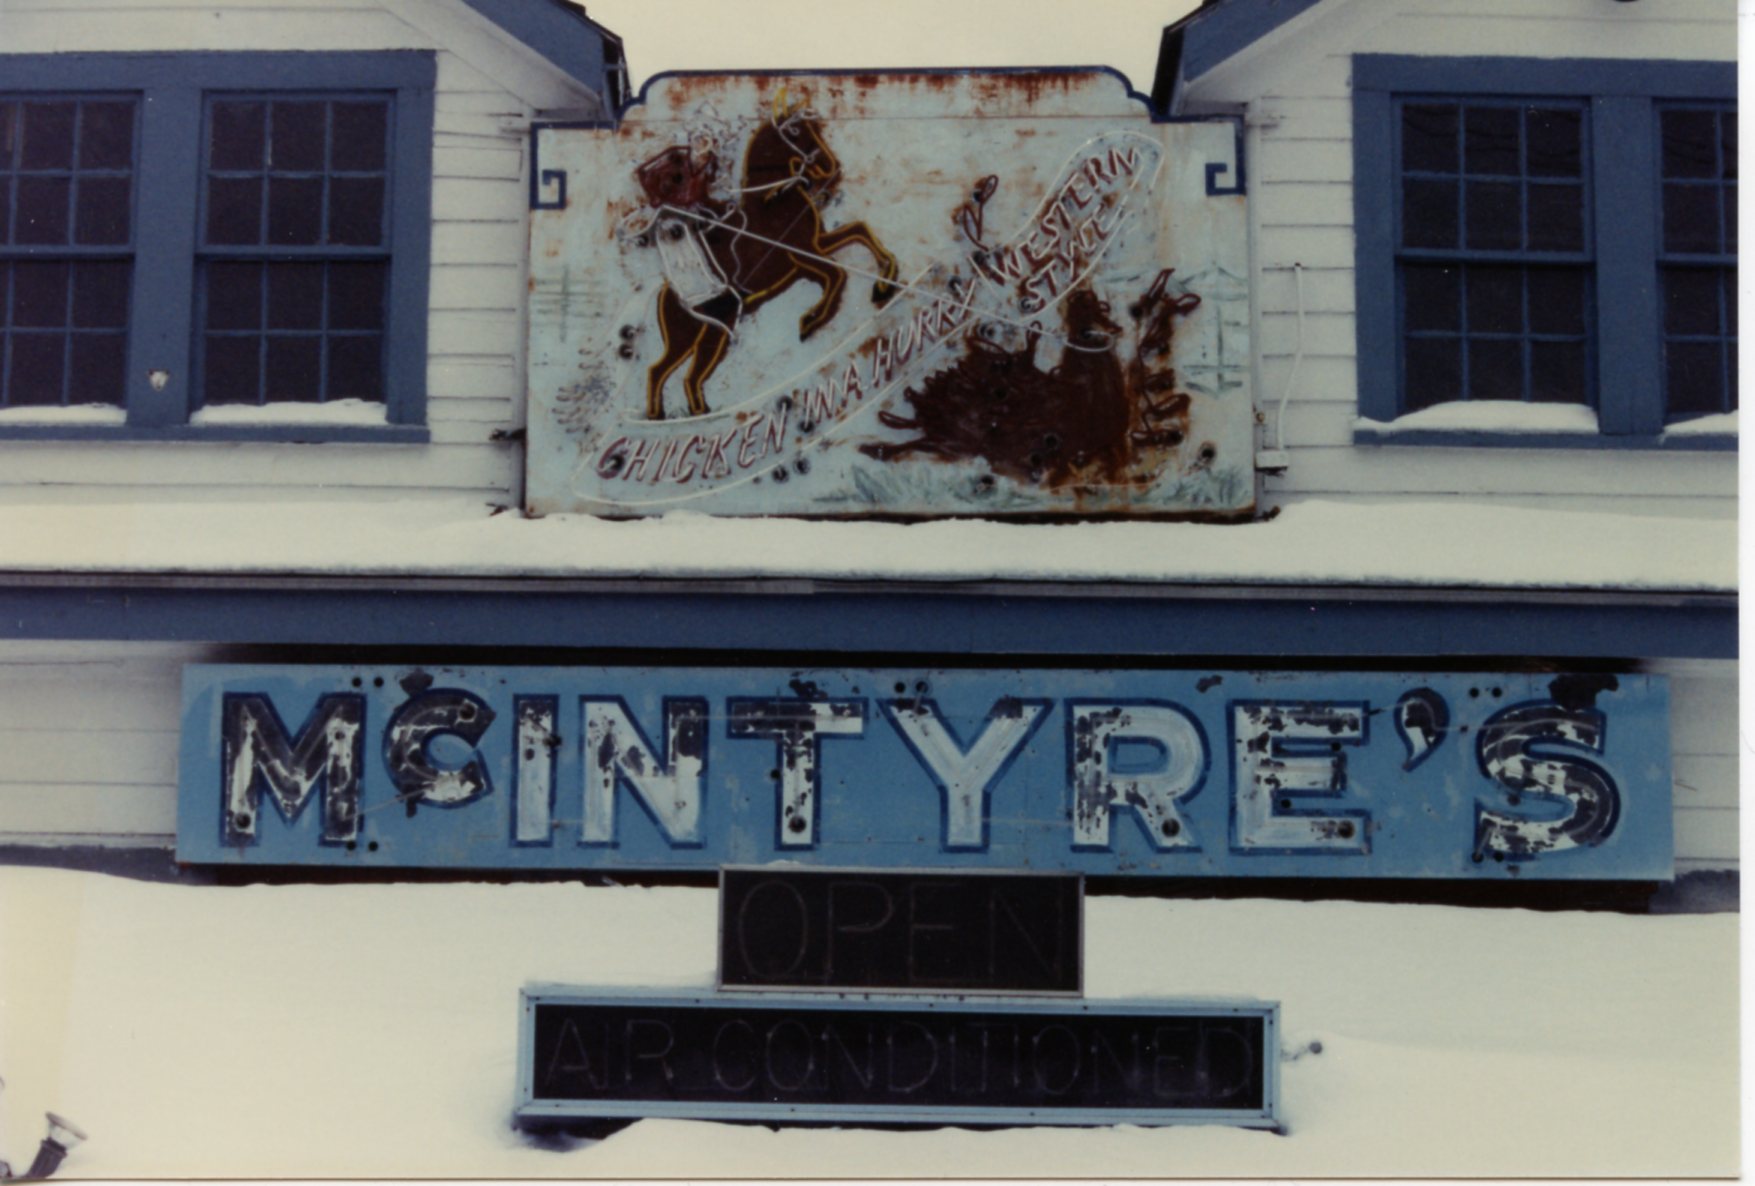 The rusty Chicken in a Hurry sign on its building from 1990.